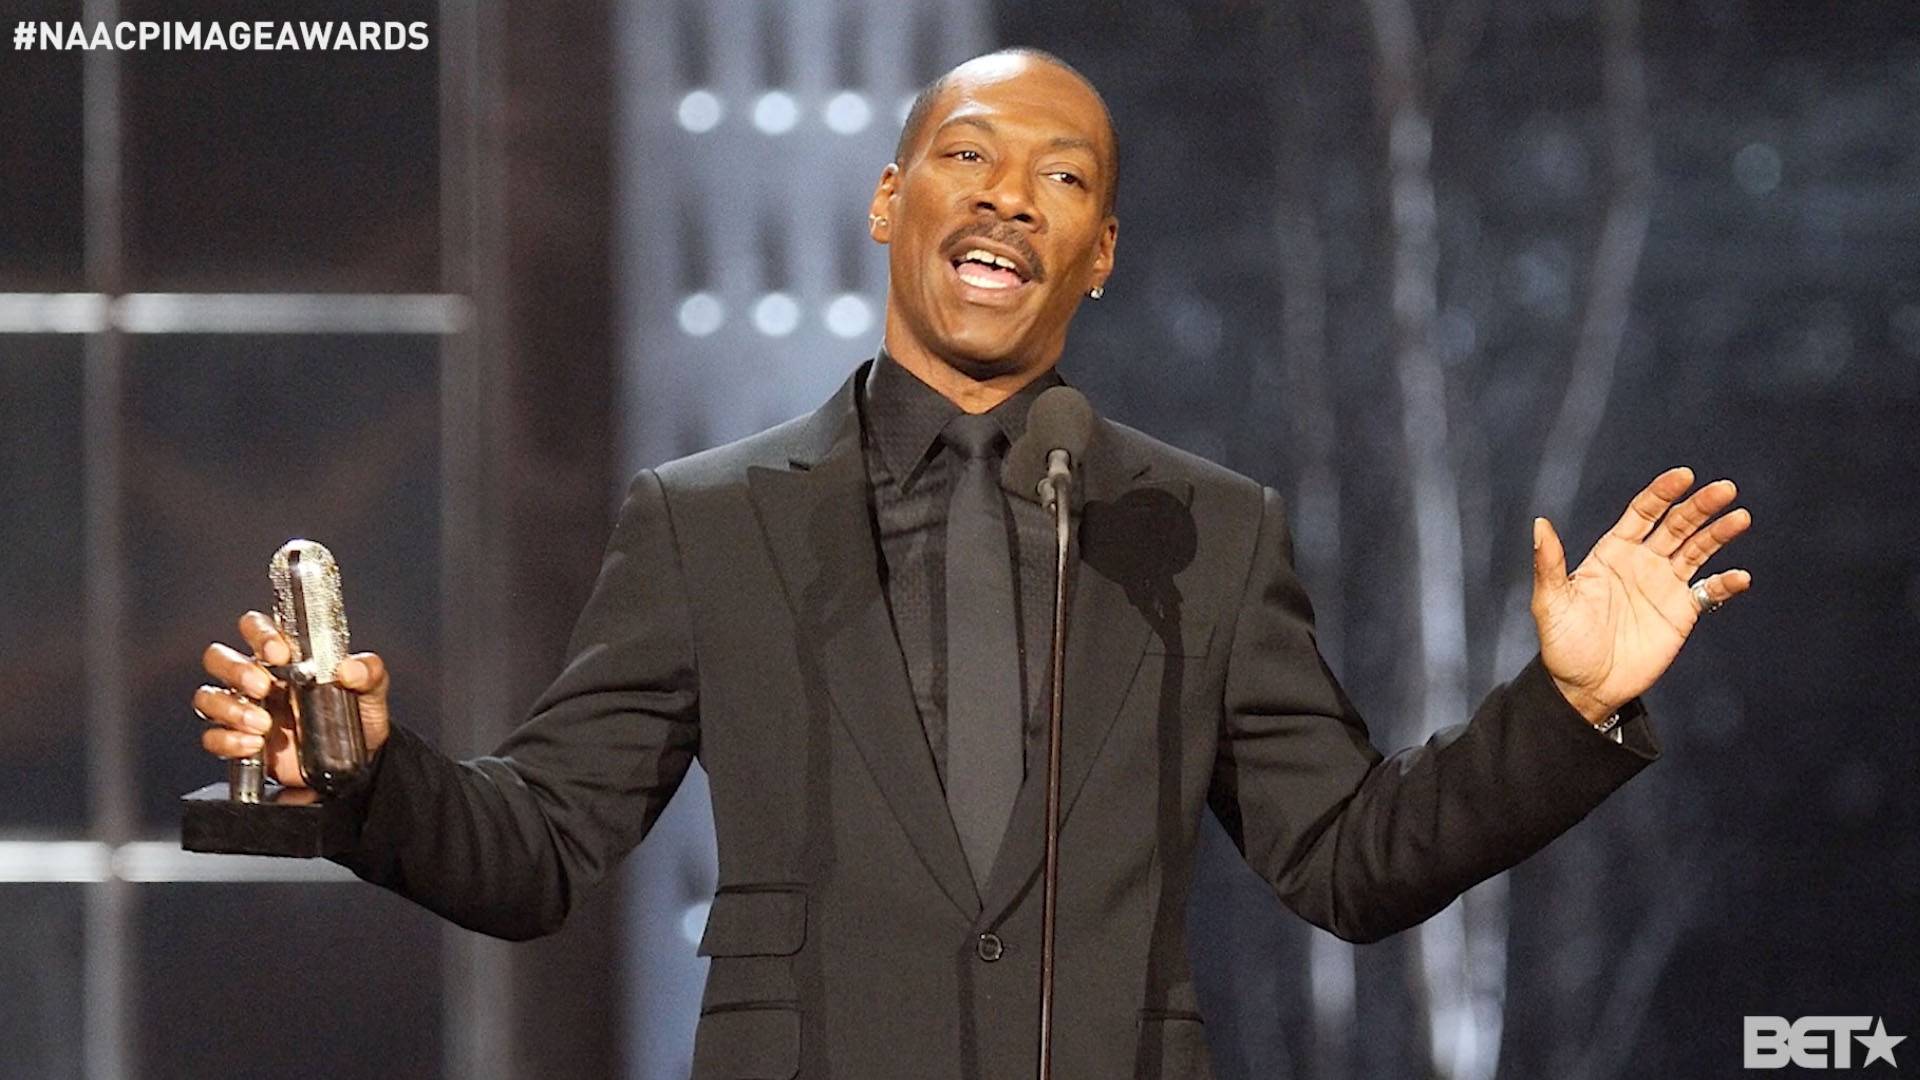 Eddie Murphy on the 52nd NAACP Image Awards on BET.